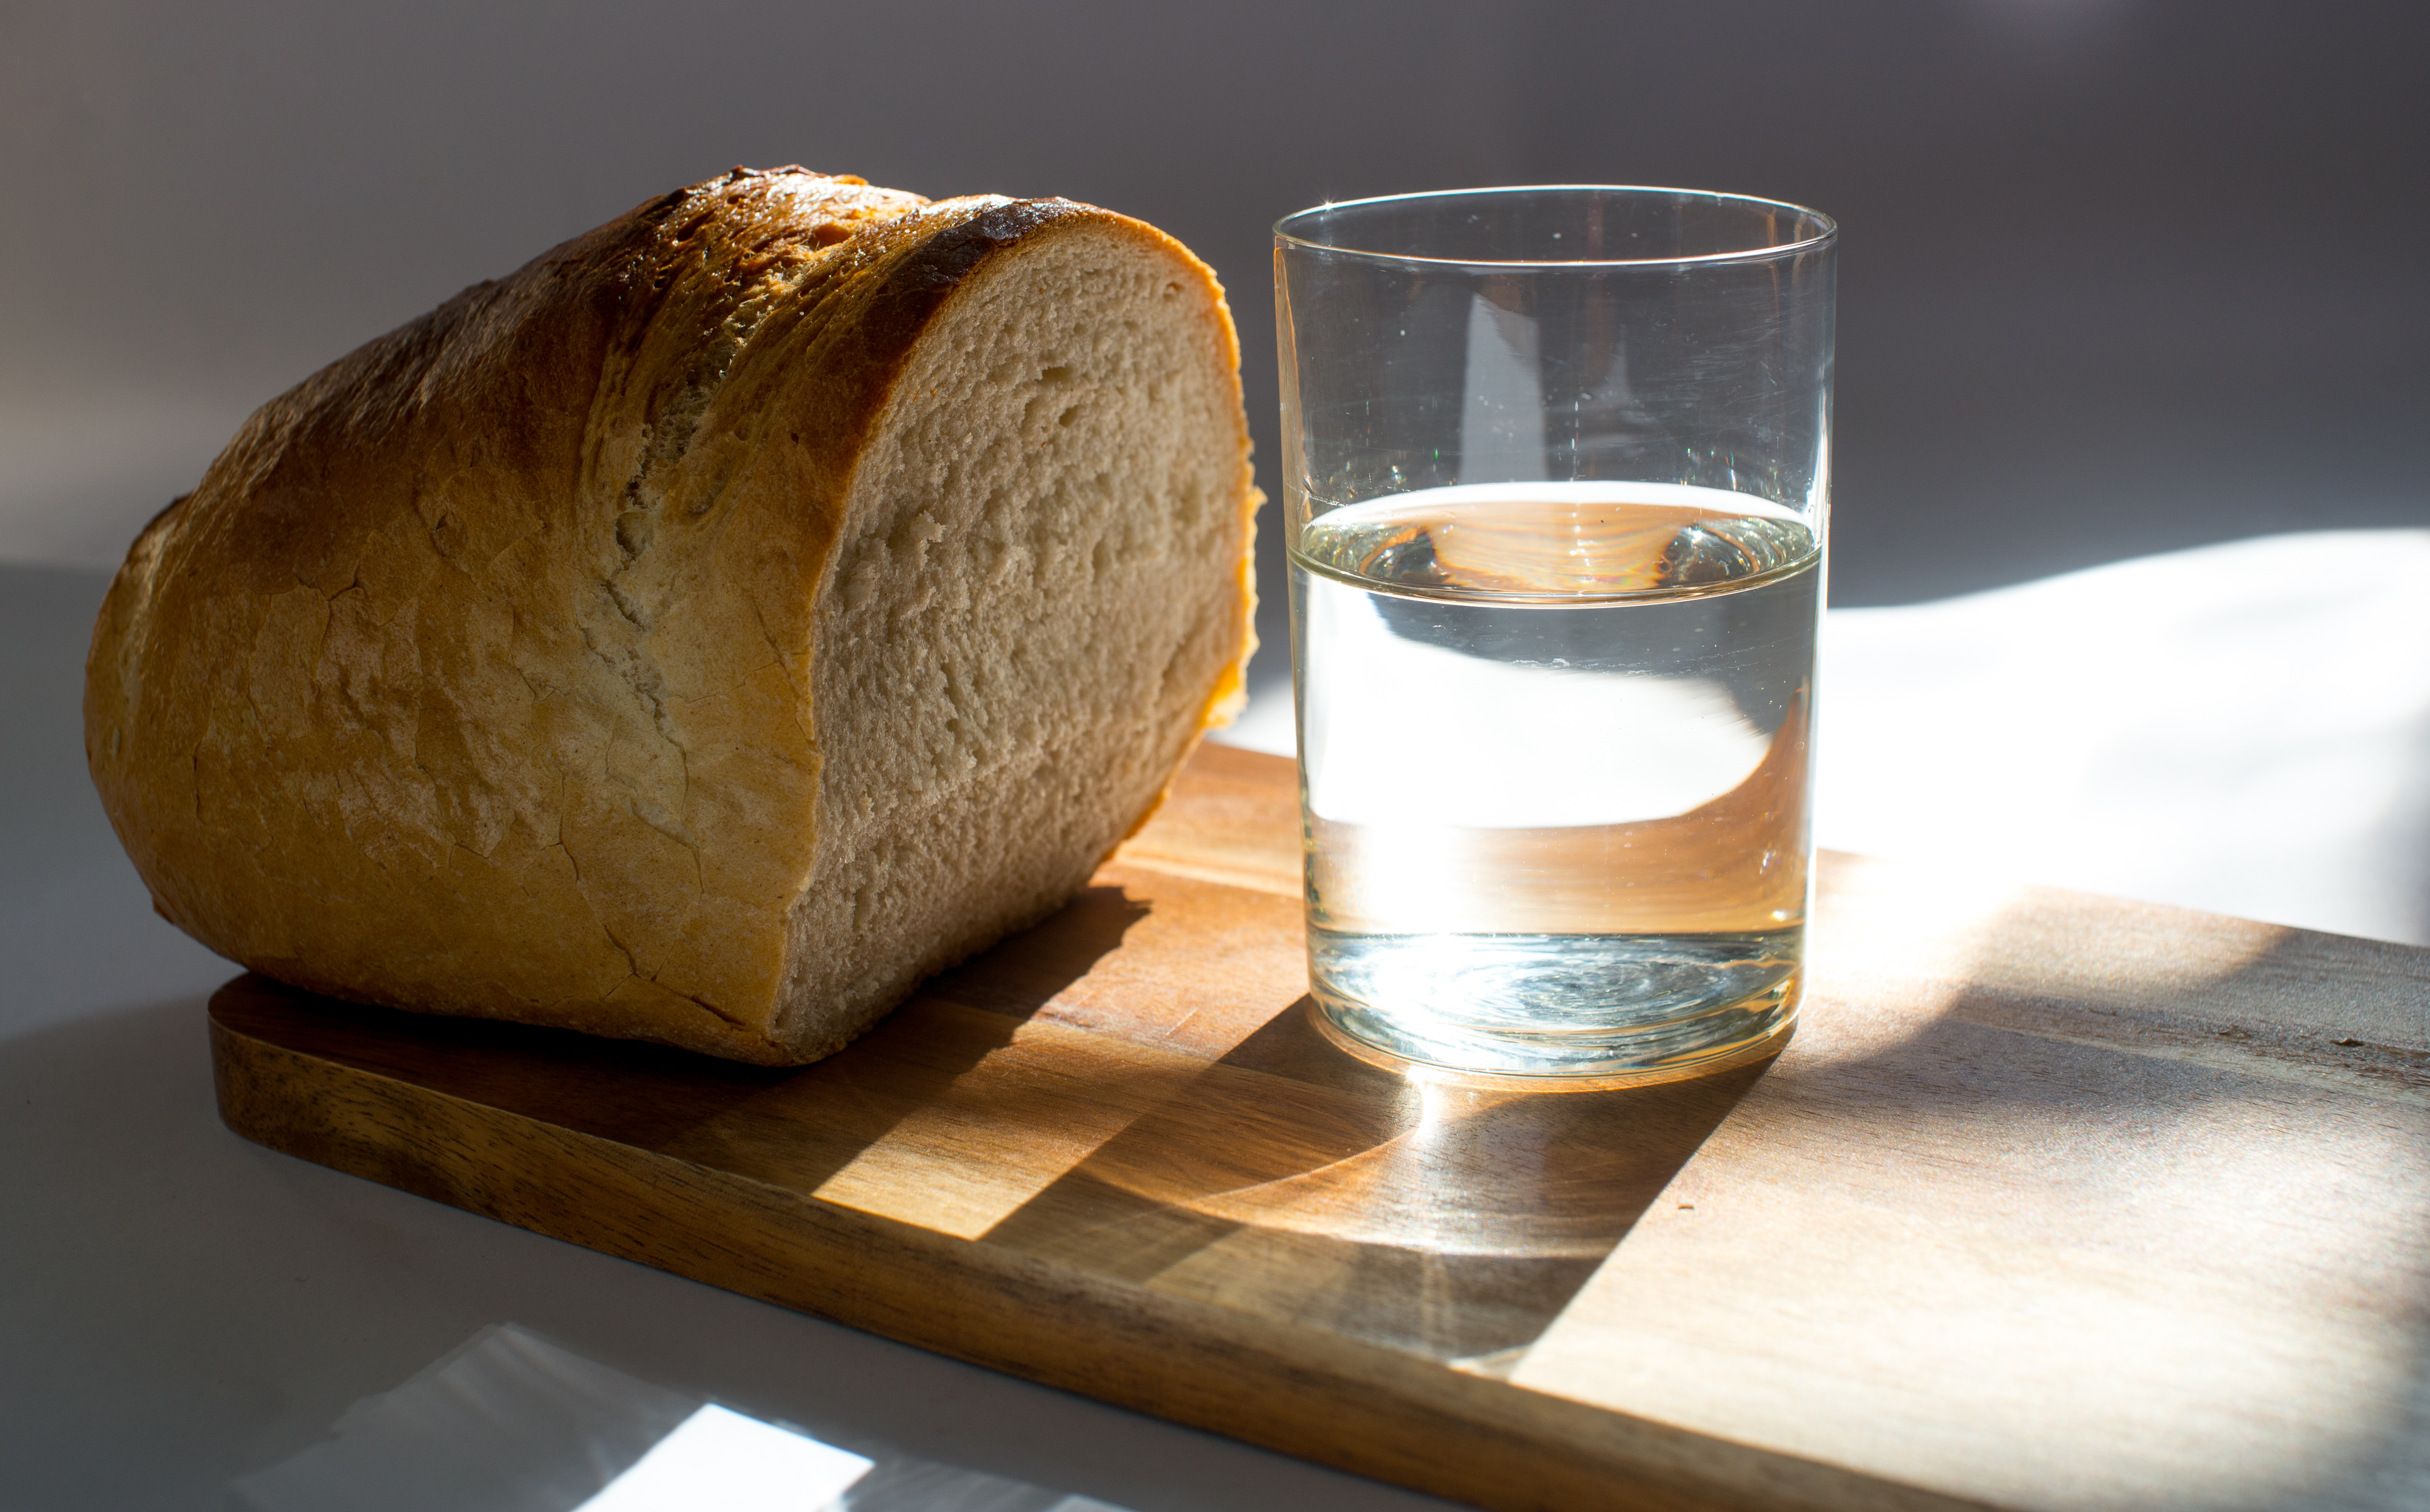 Loaf of break and glass of water